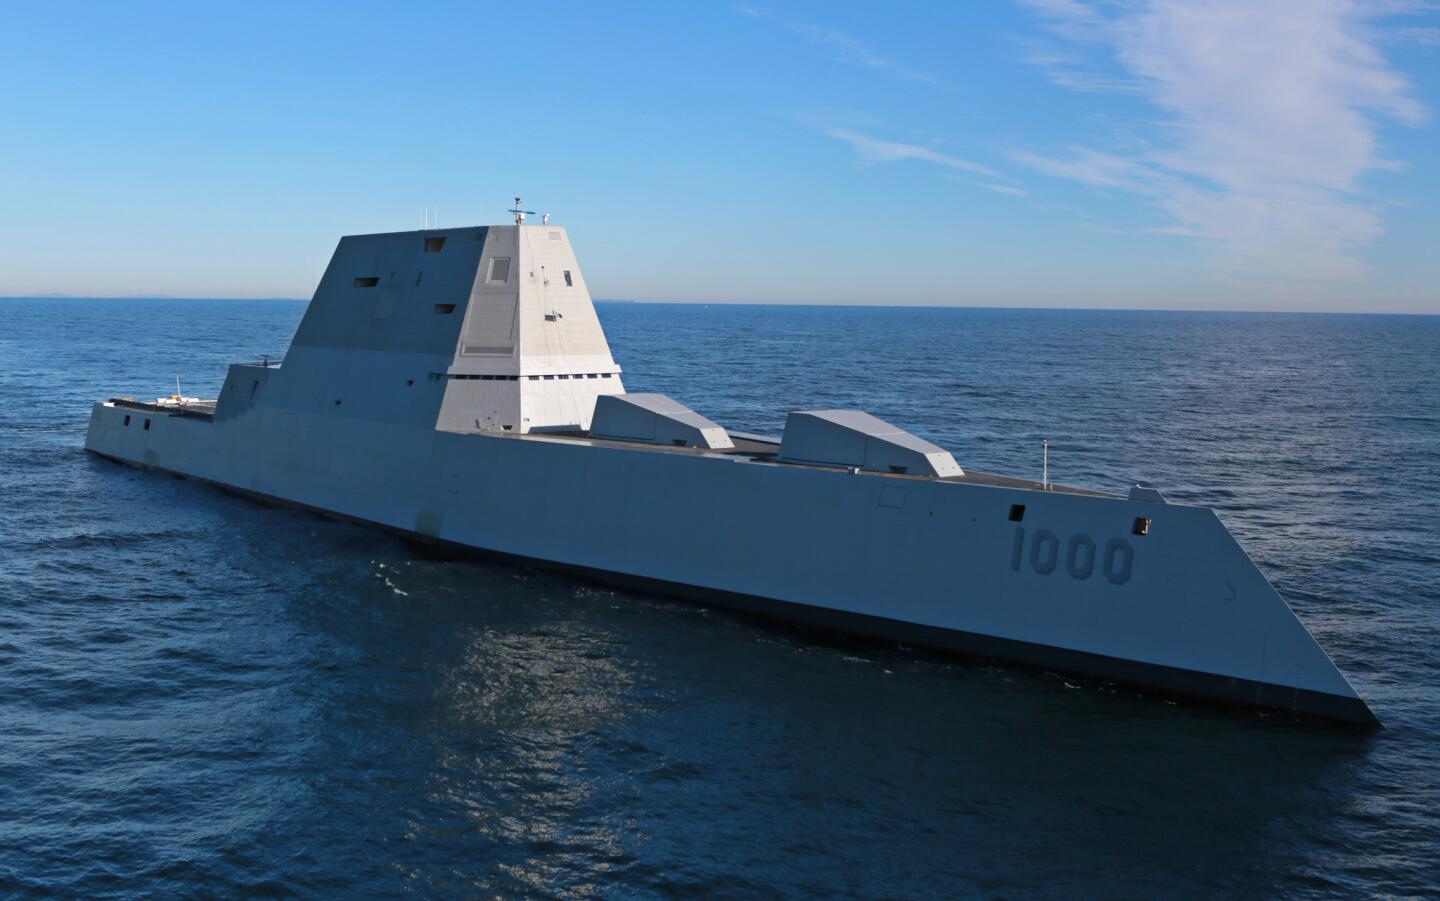 The future USS Zumwalt is underway for the first time conducting at-sea tests and trials in the Atlantic Ocean on Monday.